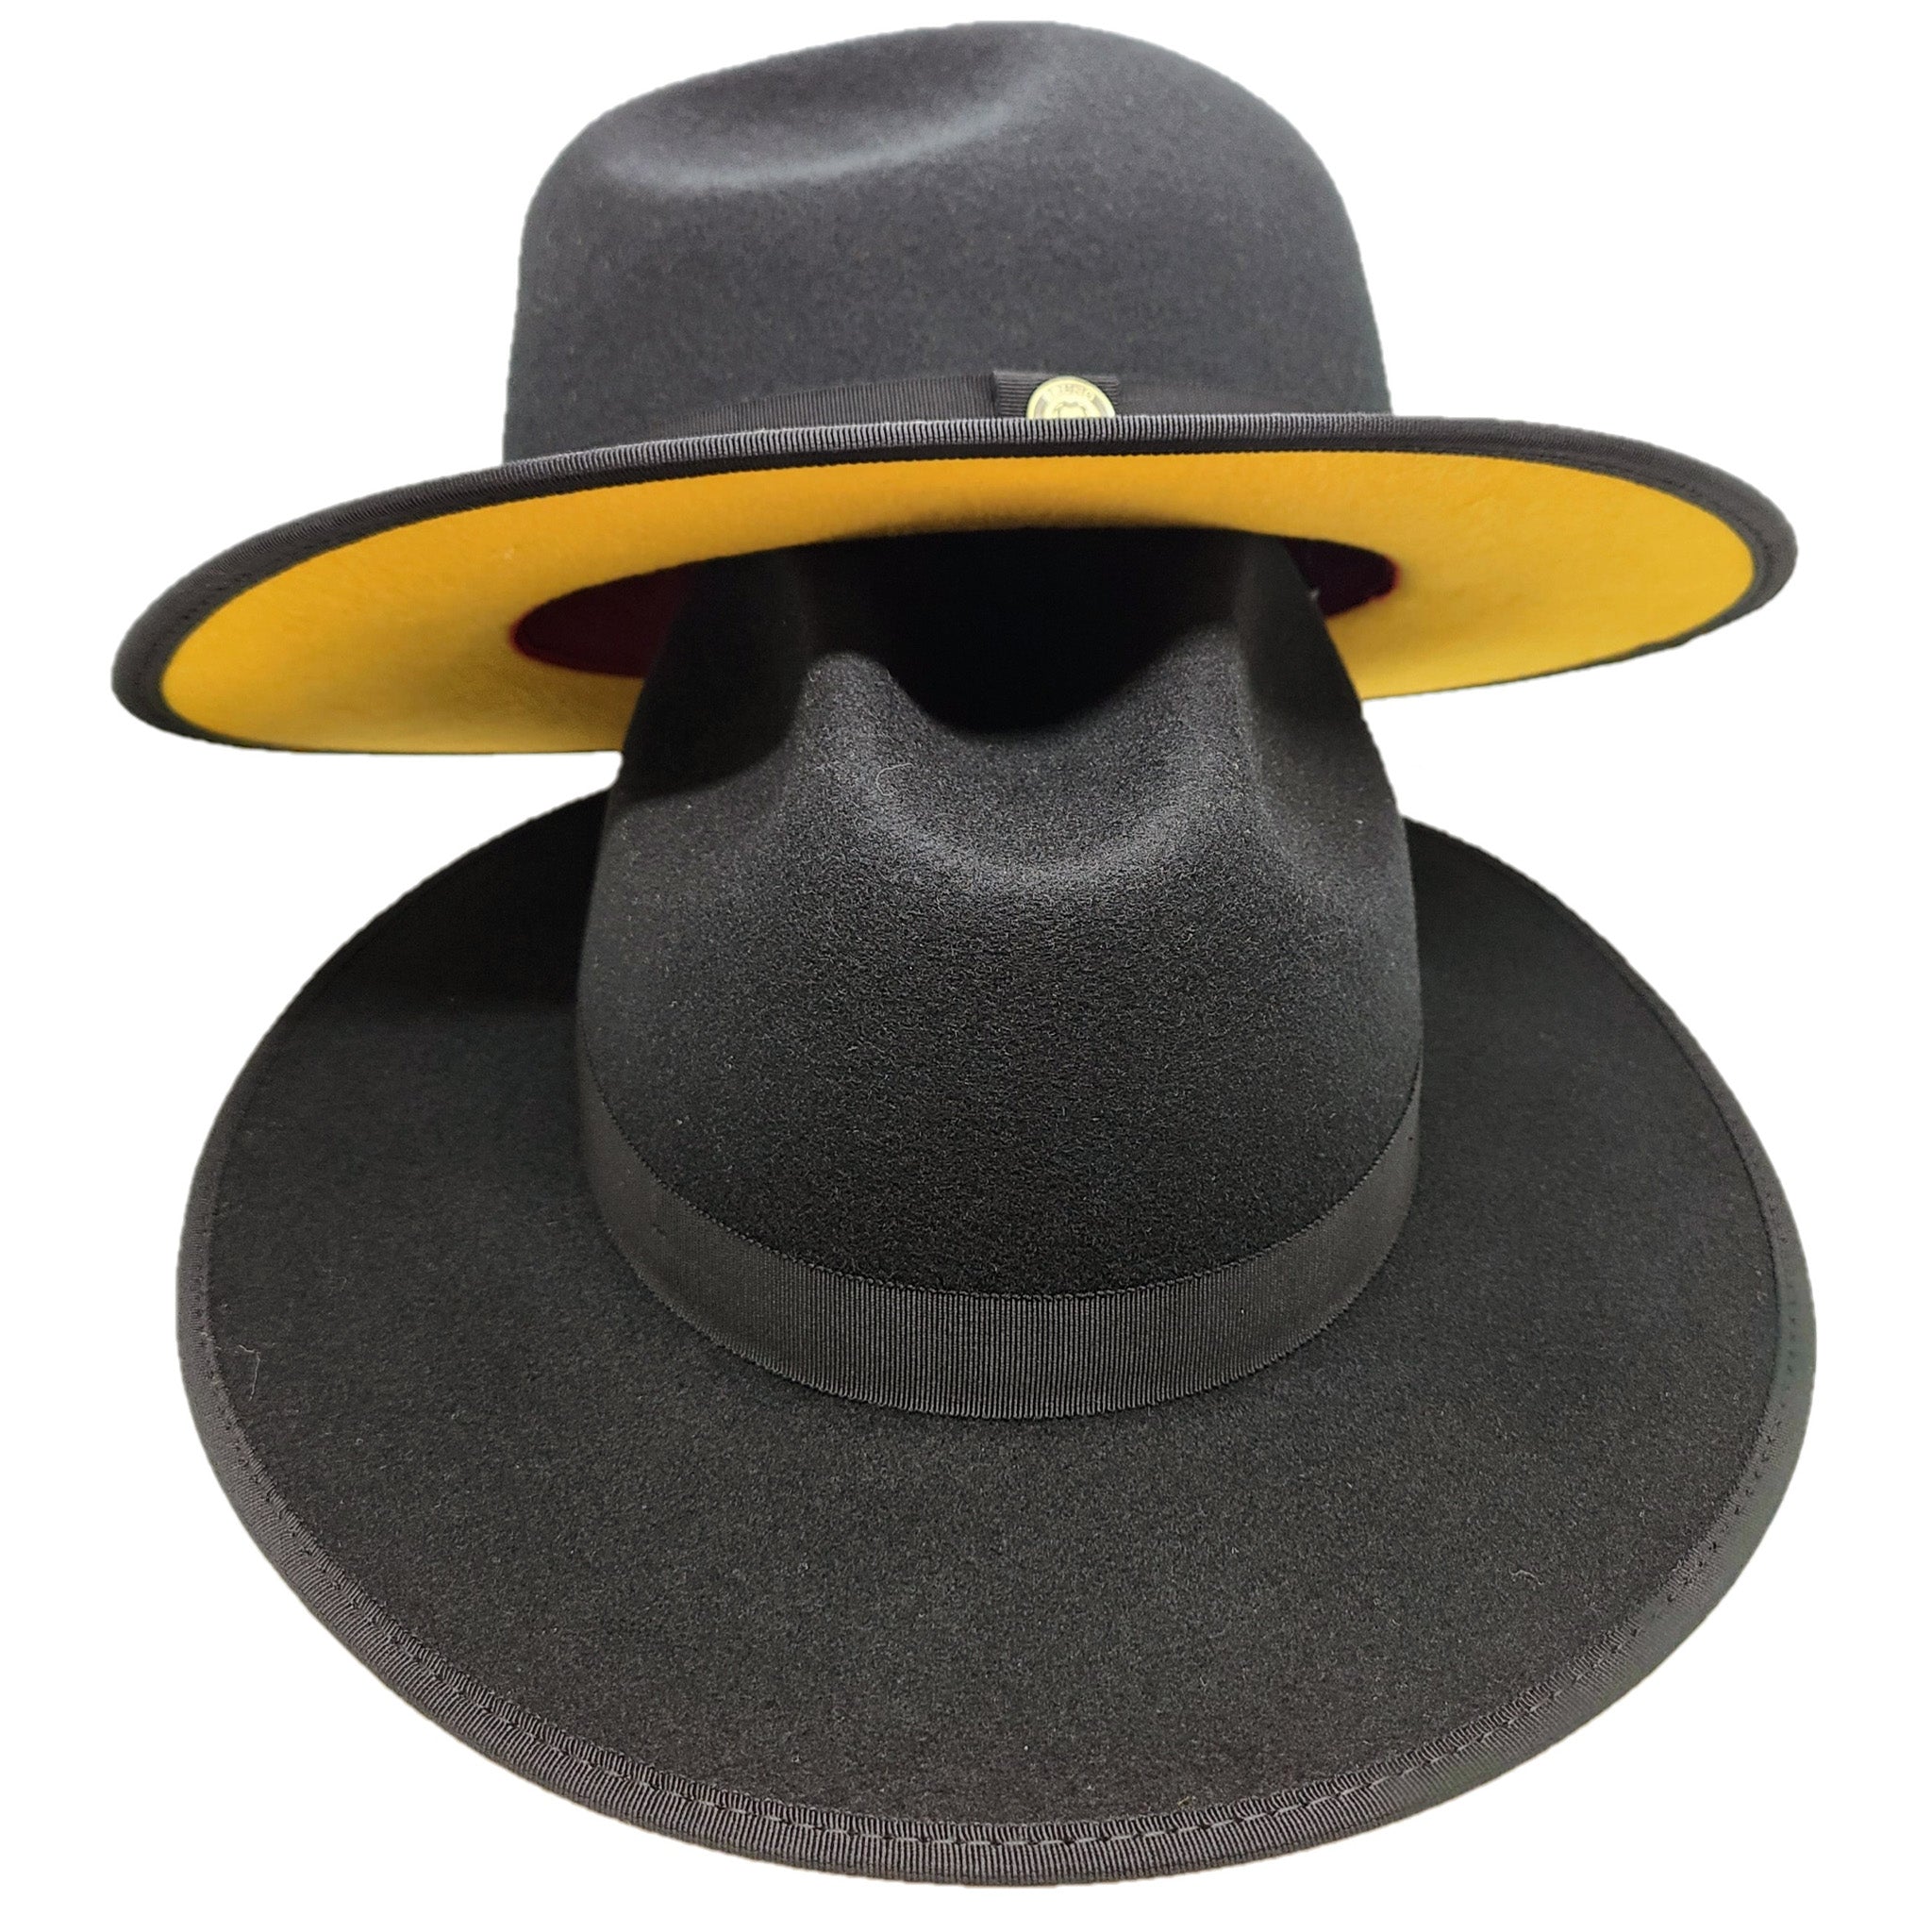 Men's and Women's Fedora Hat - High-quality Australian wool with a black and gold color scheme, perfect for a timeless and elegant look.